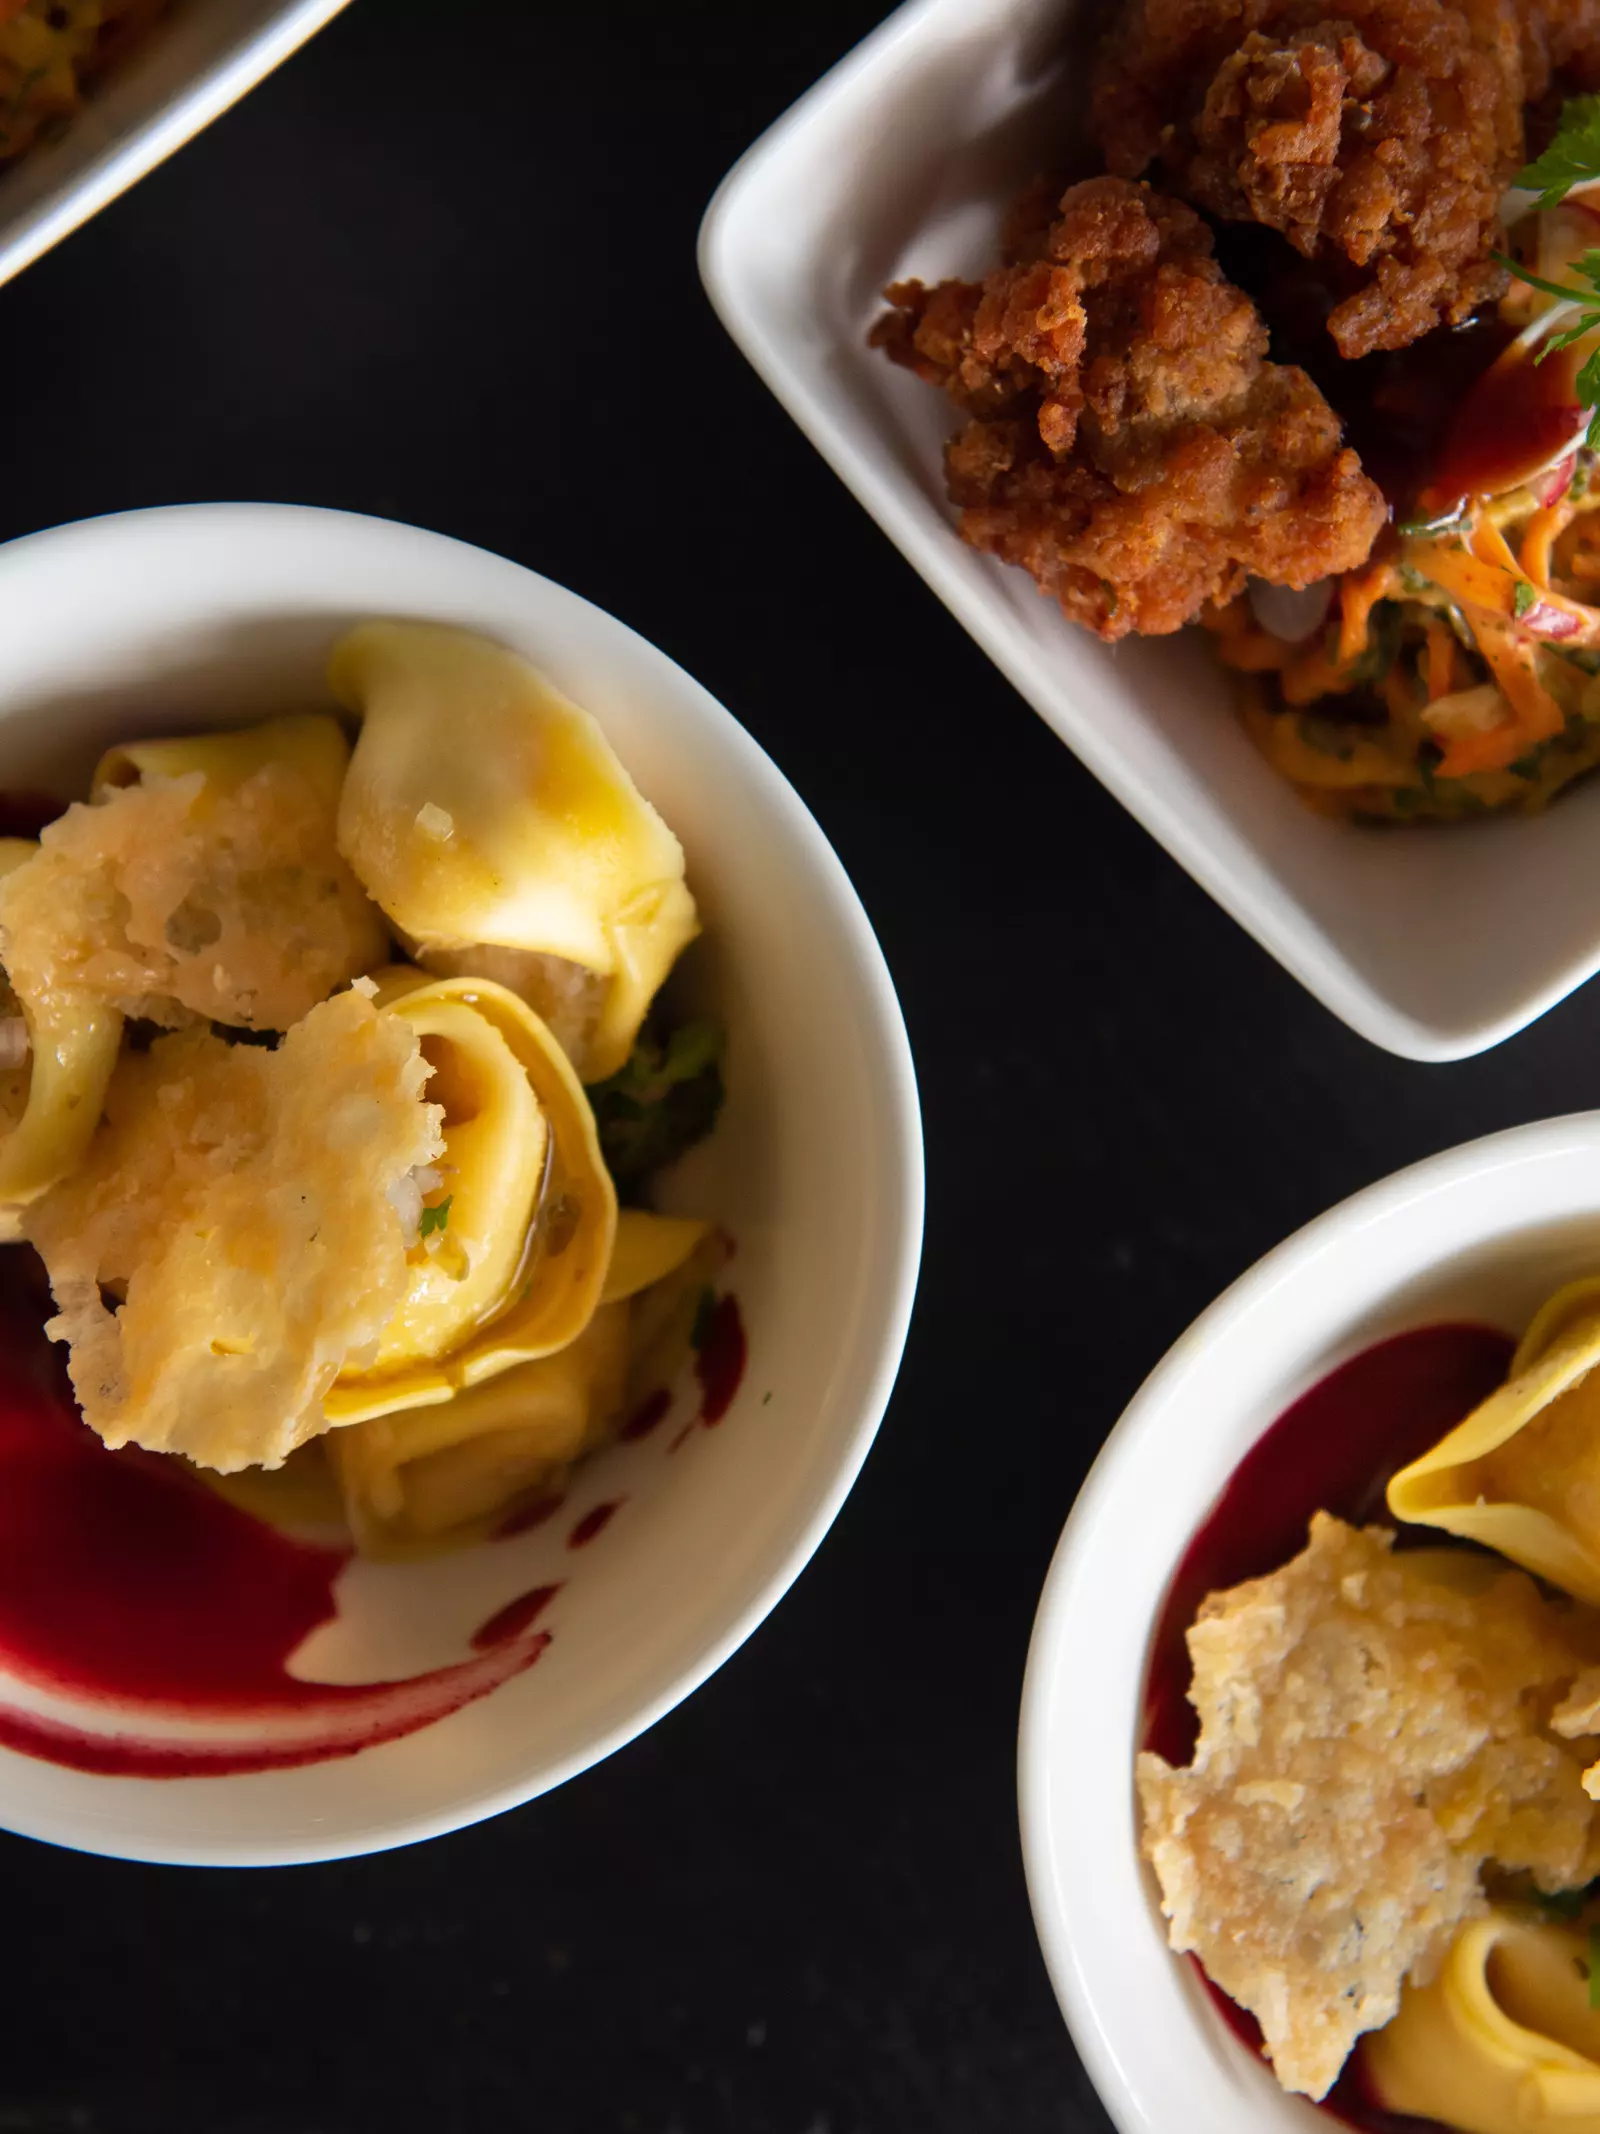 Bowls of tortellini and bowls of a fried chicken dish on a table 